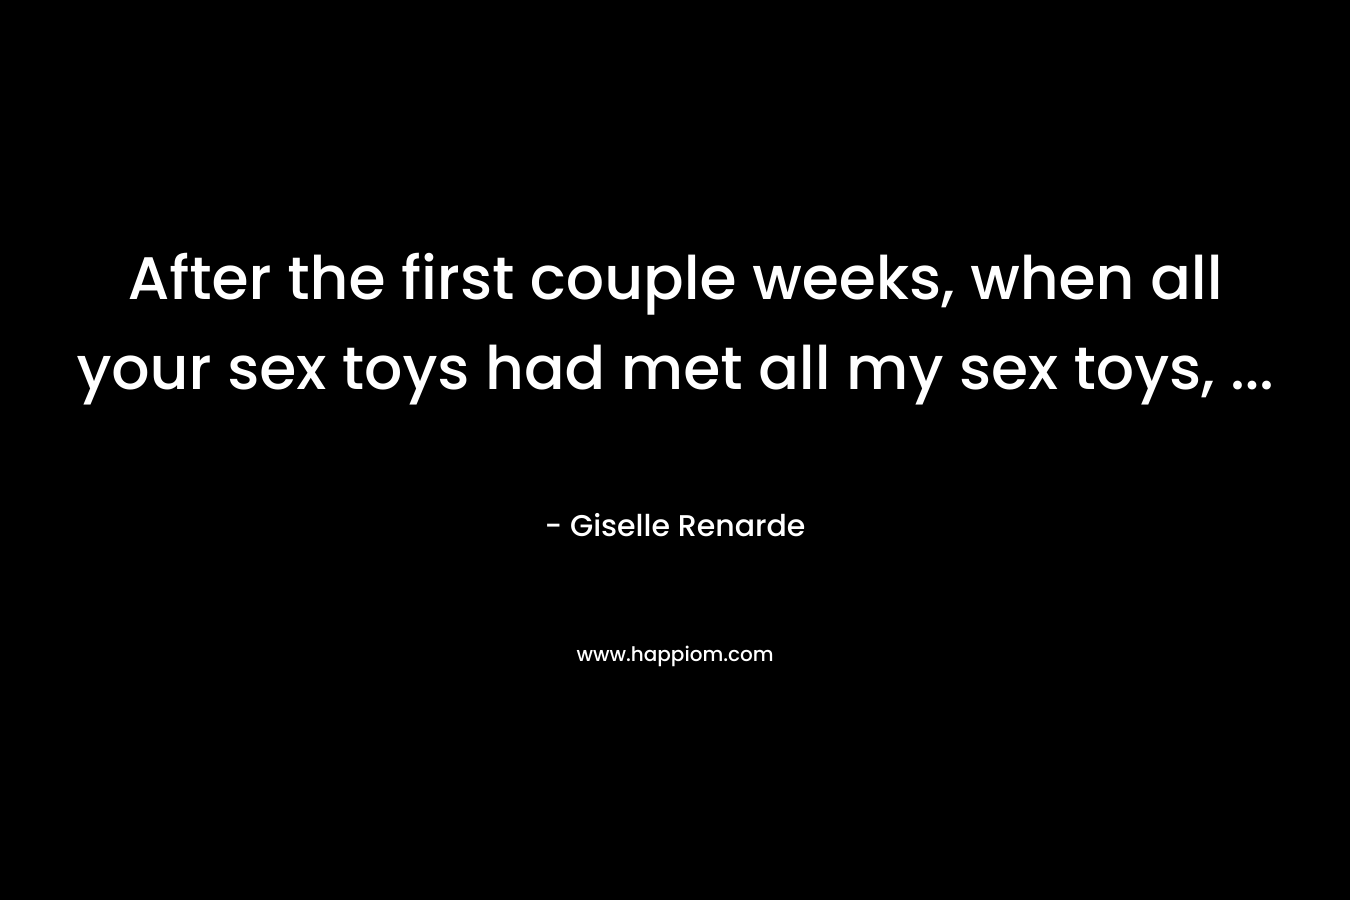 After the first couple weeks, when all your sex toys had met all my sex toys, ...